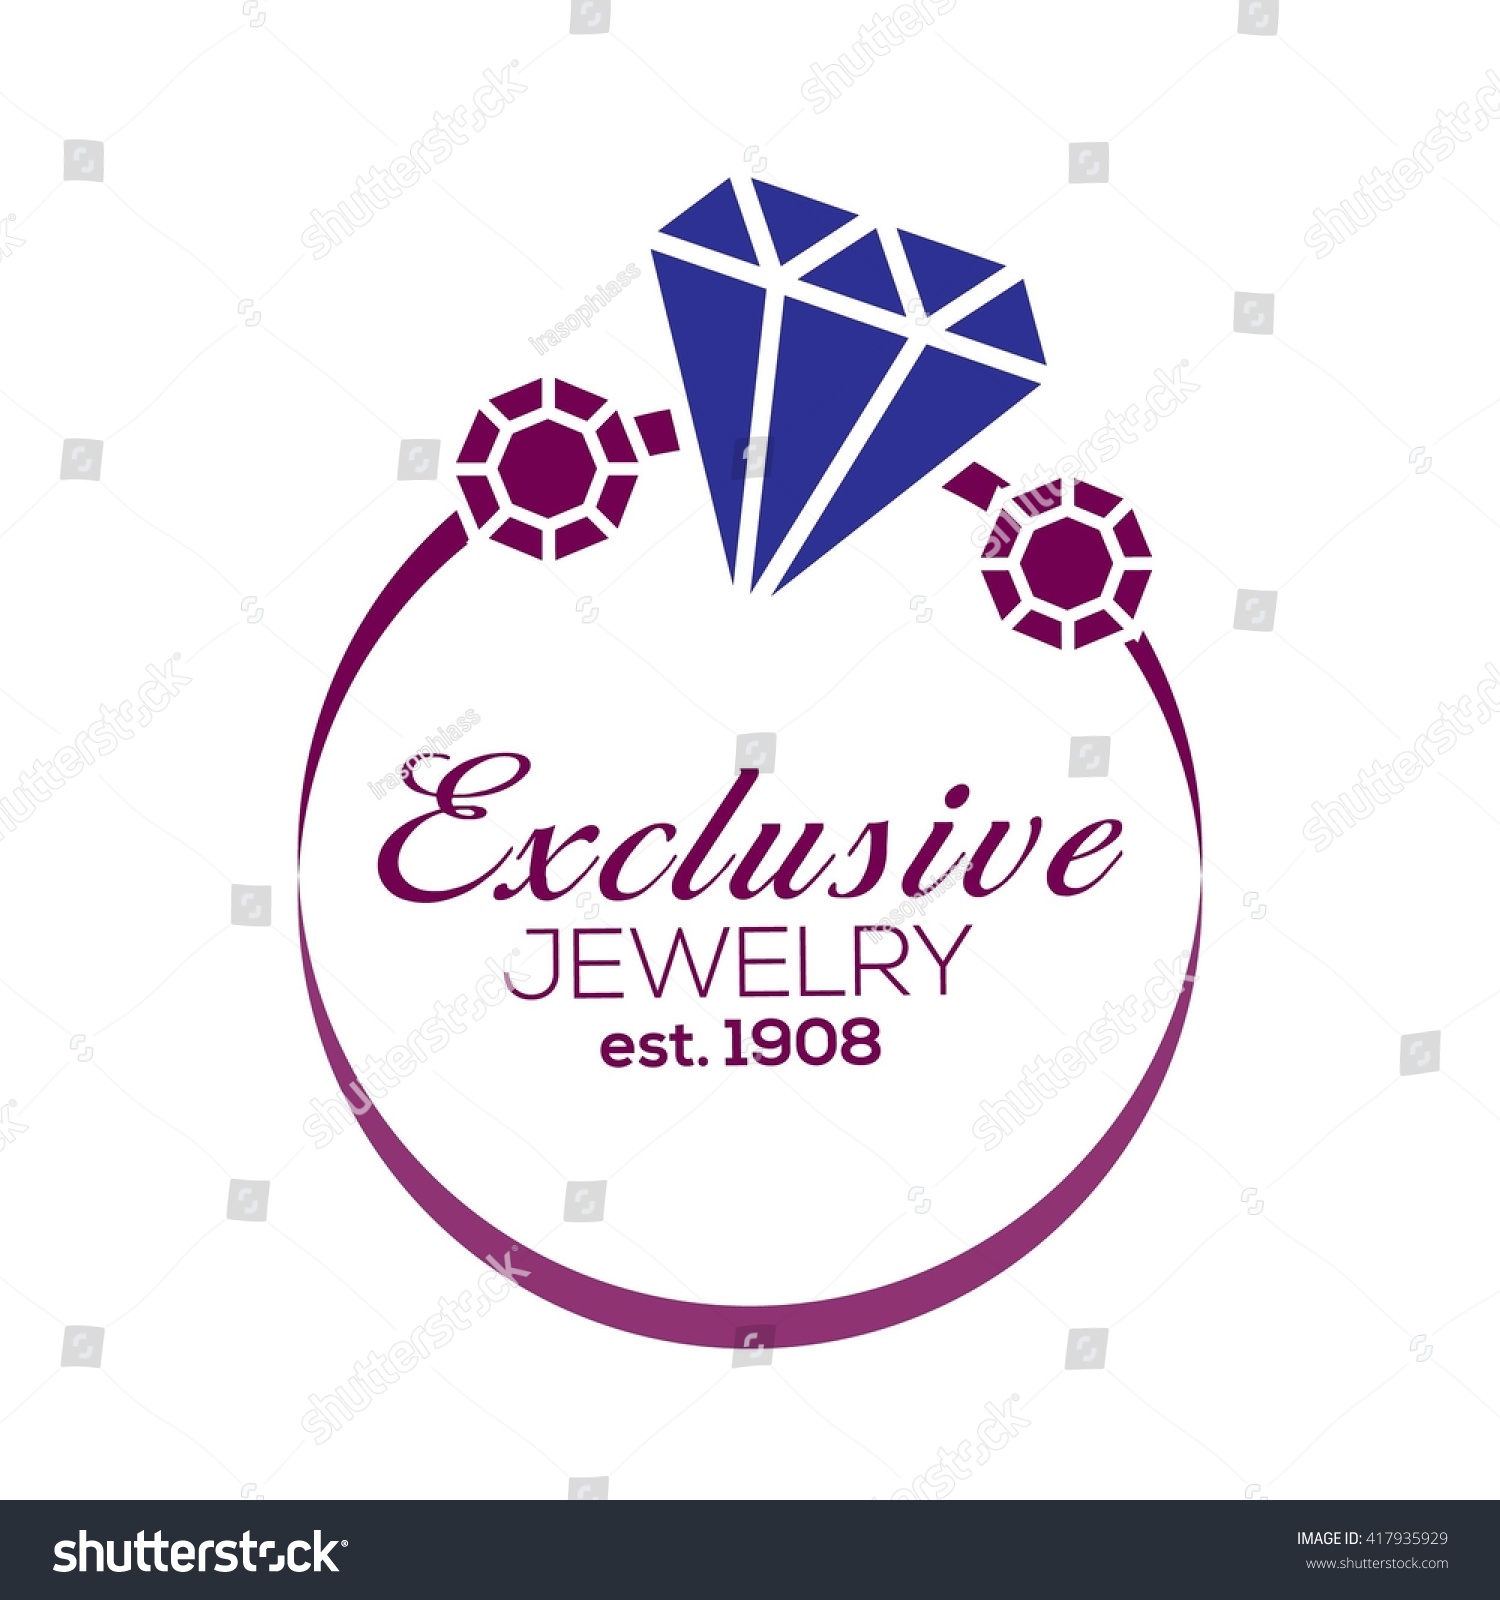 Jewelry Logo Template Stock Vector (Royalty Free) 417935929